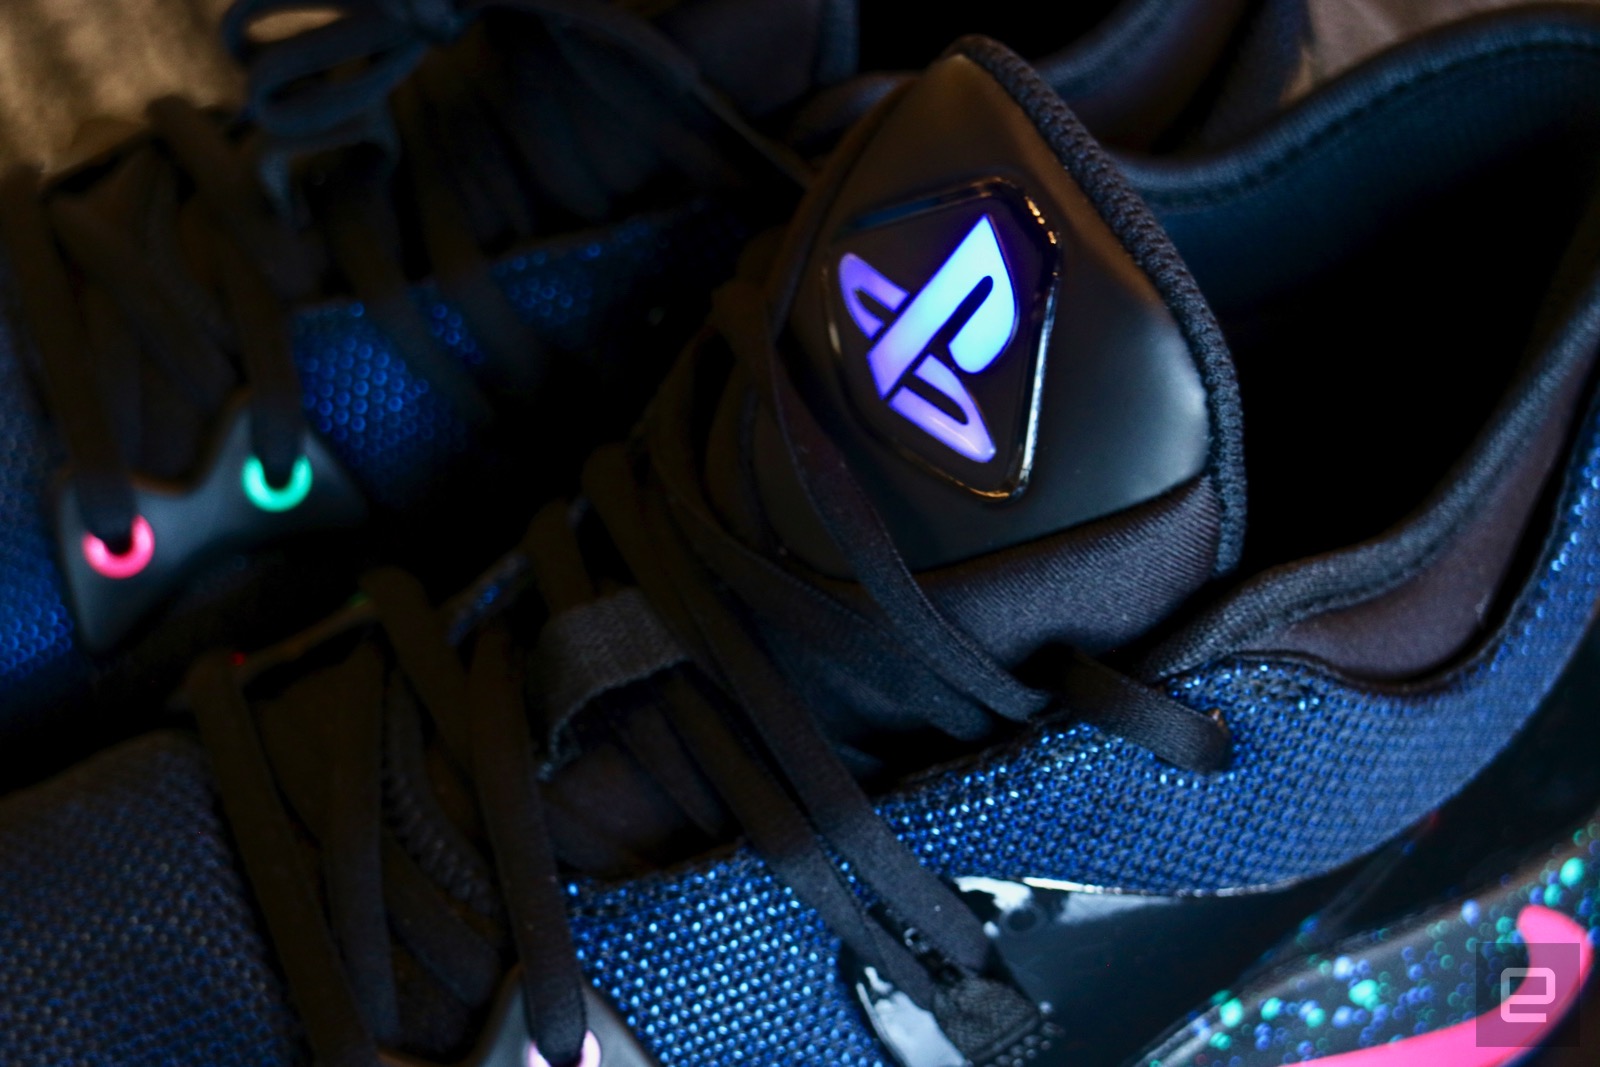 Nike's shoes make hypebeasts out of gamers | Engadget